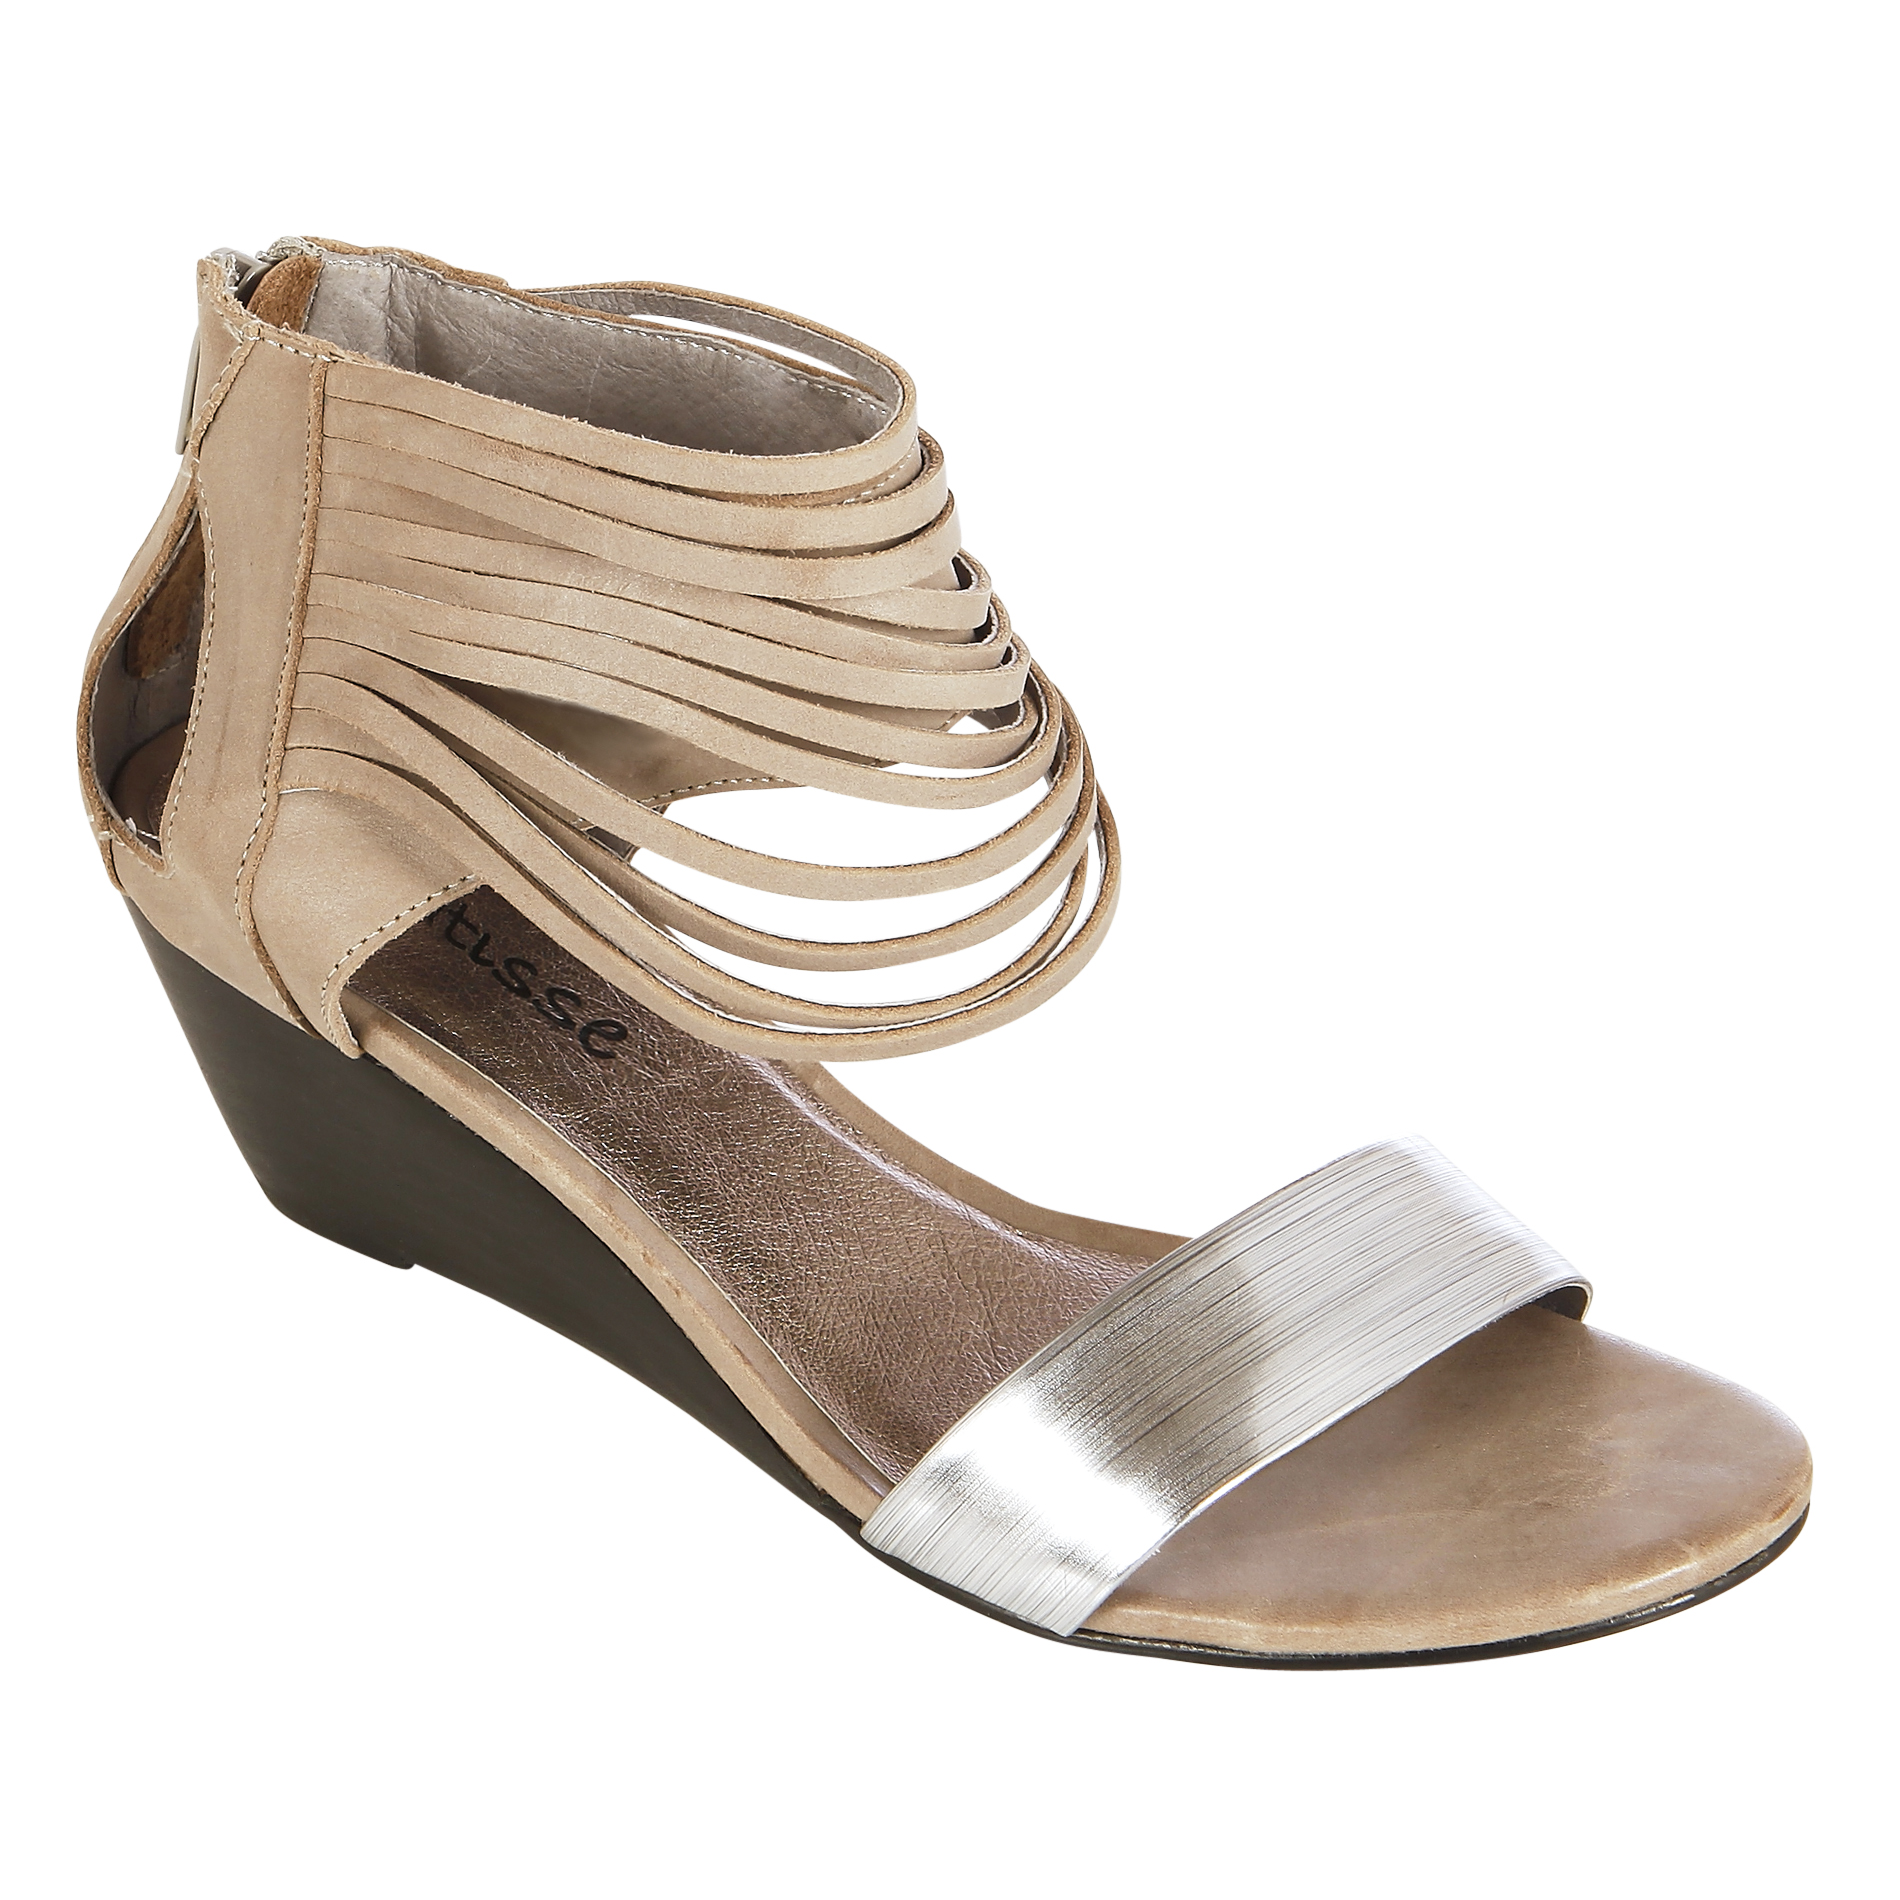 Coconuts by Matisse Women's Wedge Sandal City Scape - Silver/Taupe